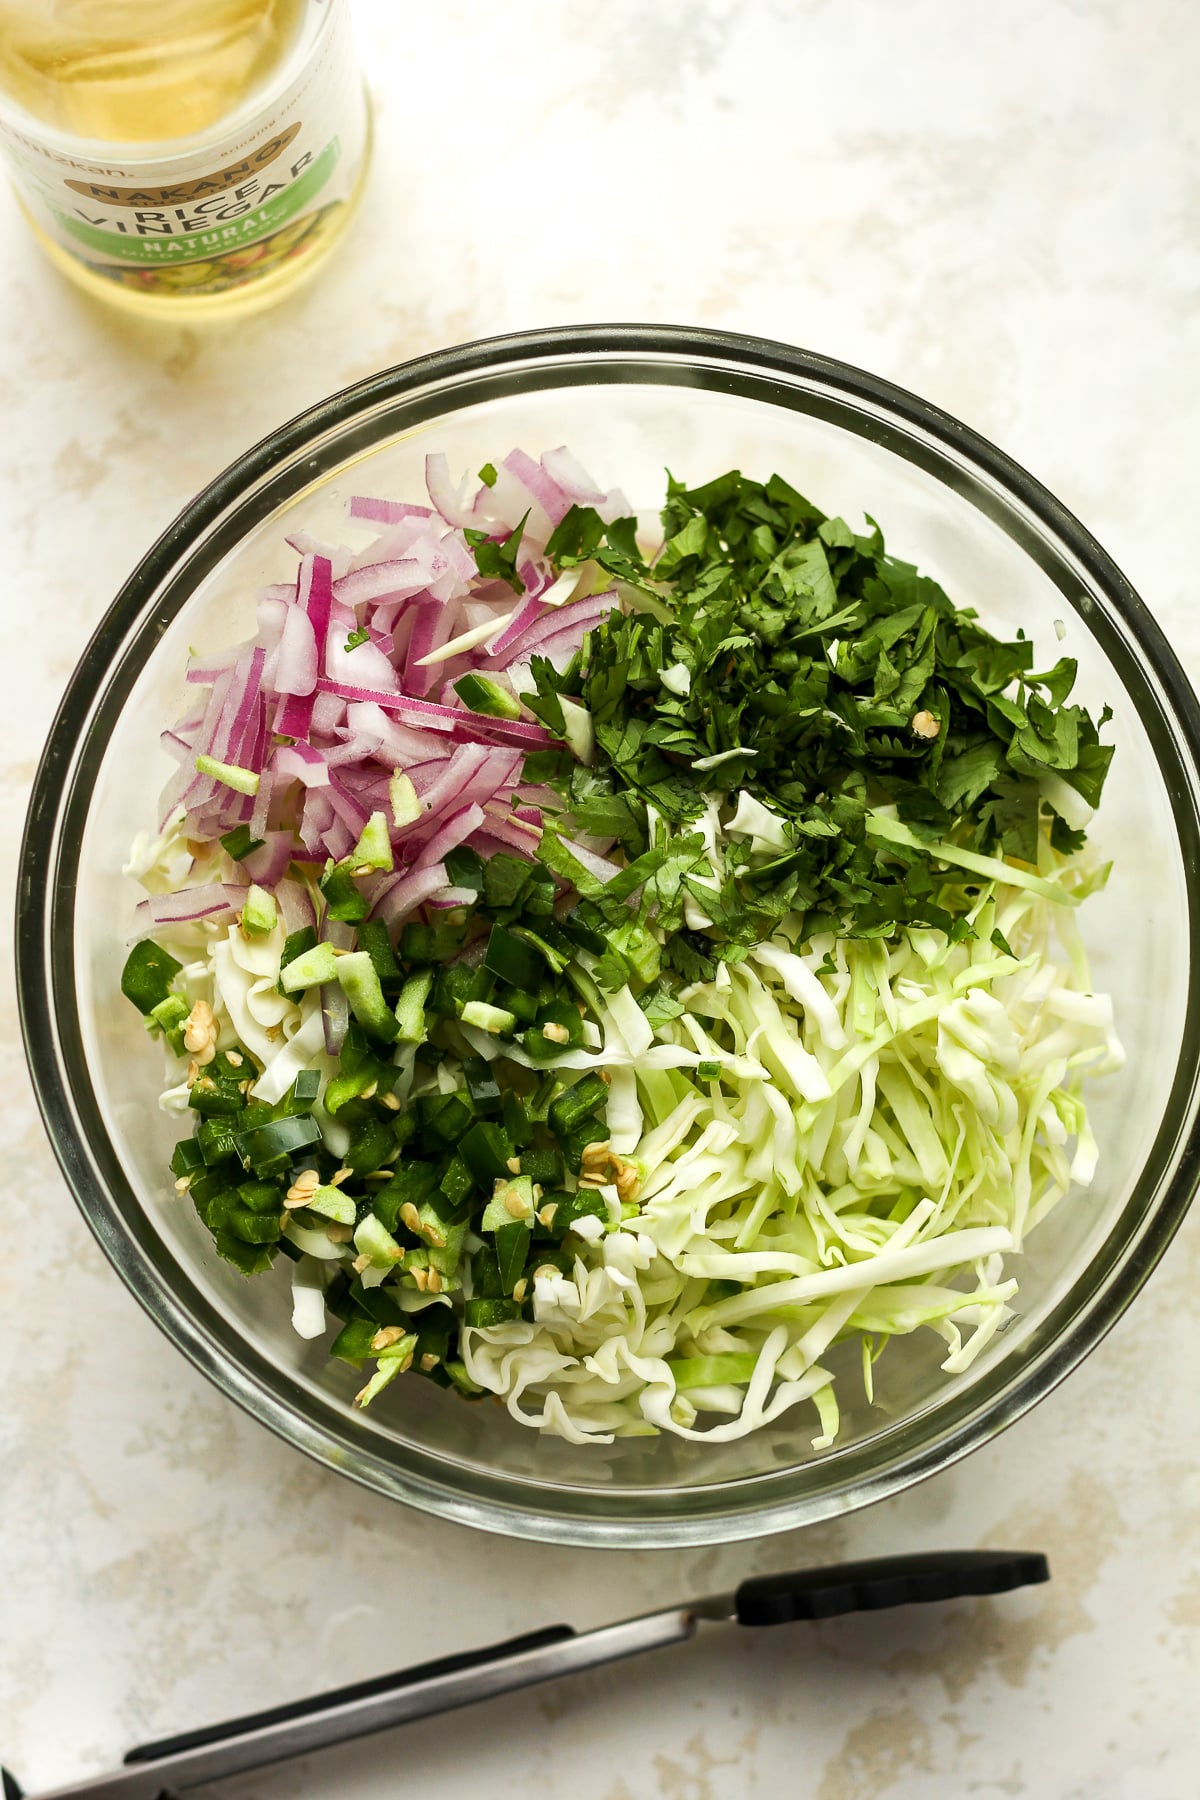 A bowl of the slaw ingredients before mixing together.